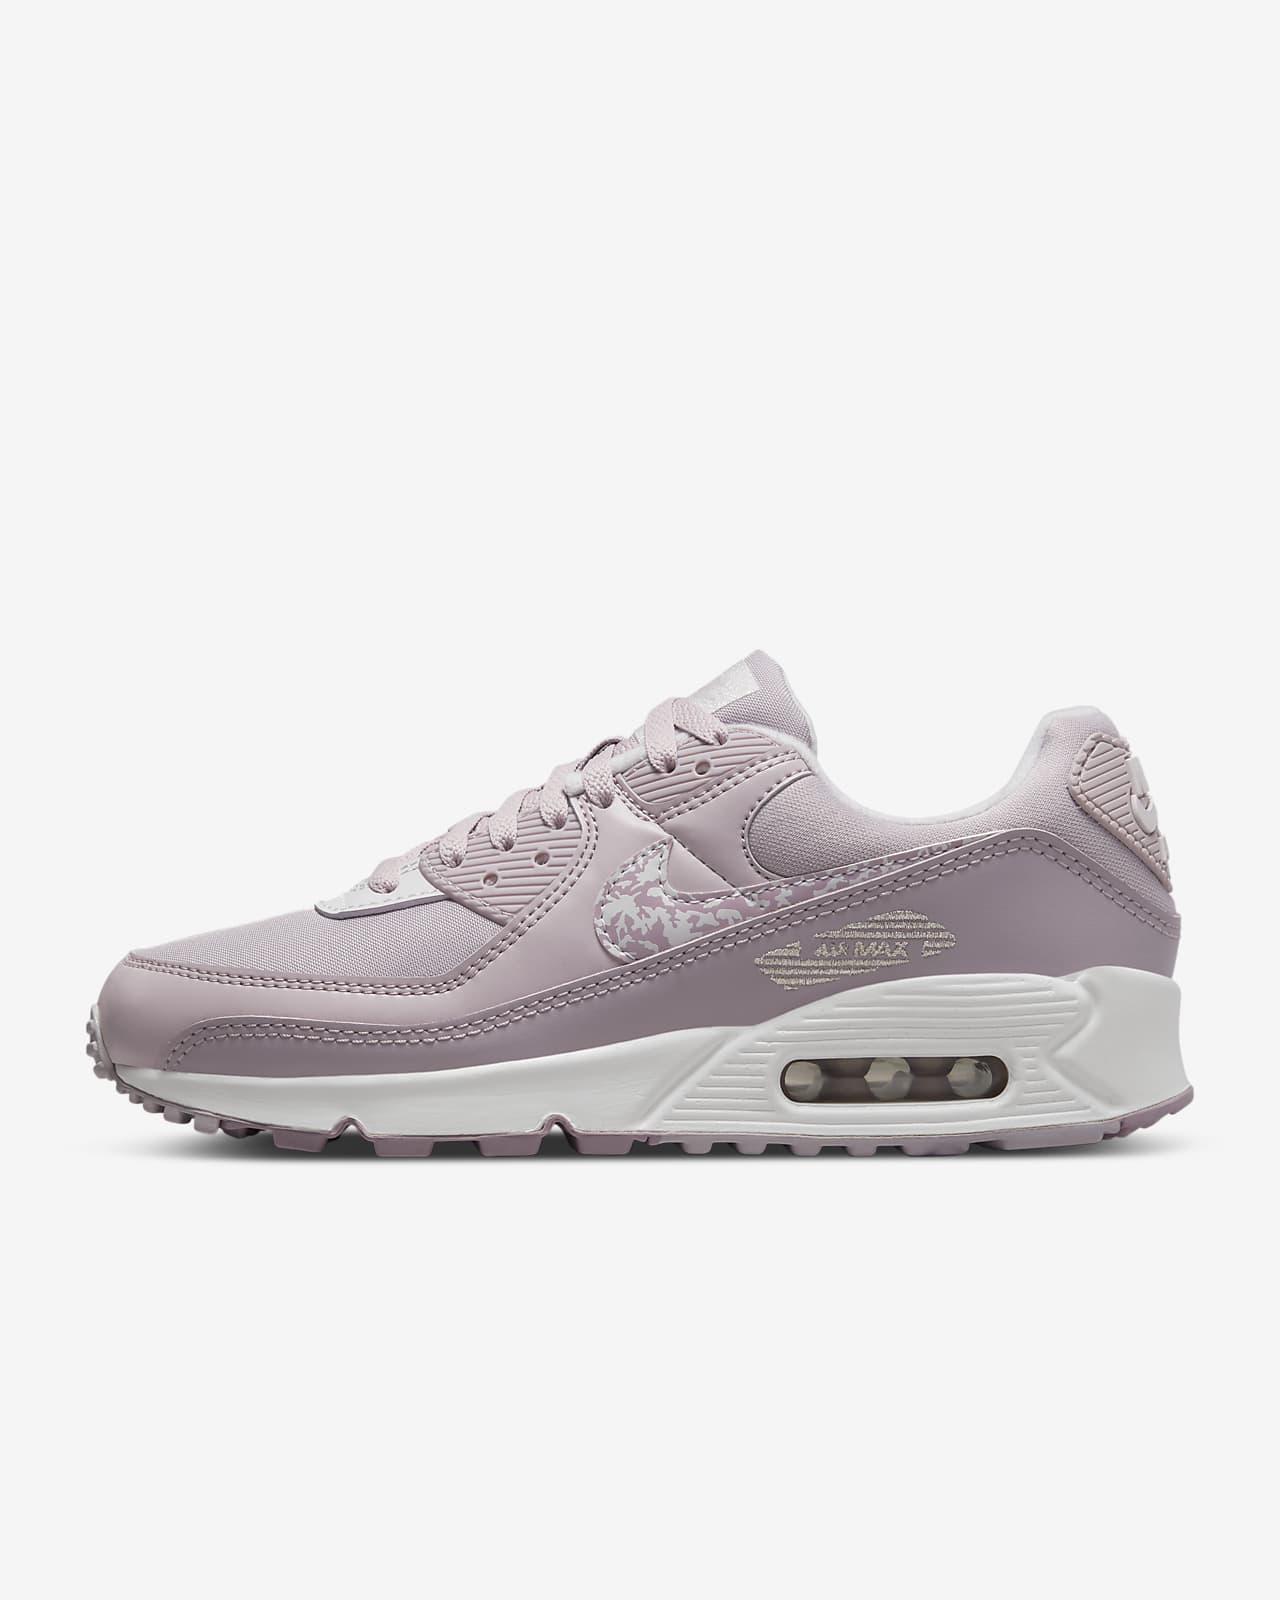 Nike Air Max 90 Women's Shoes. Nike.com افضل موقد كهربائي